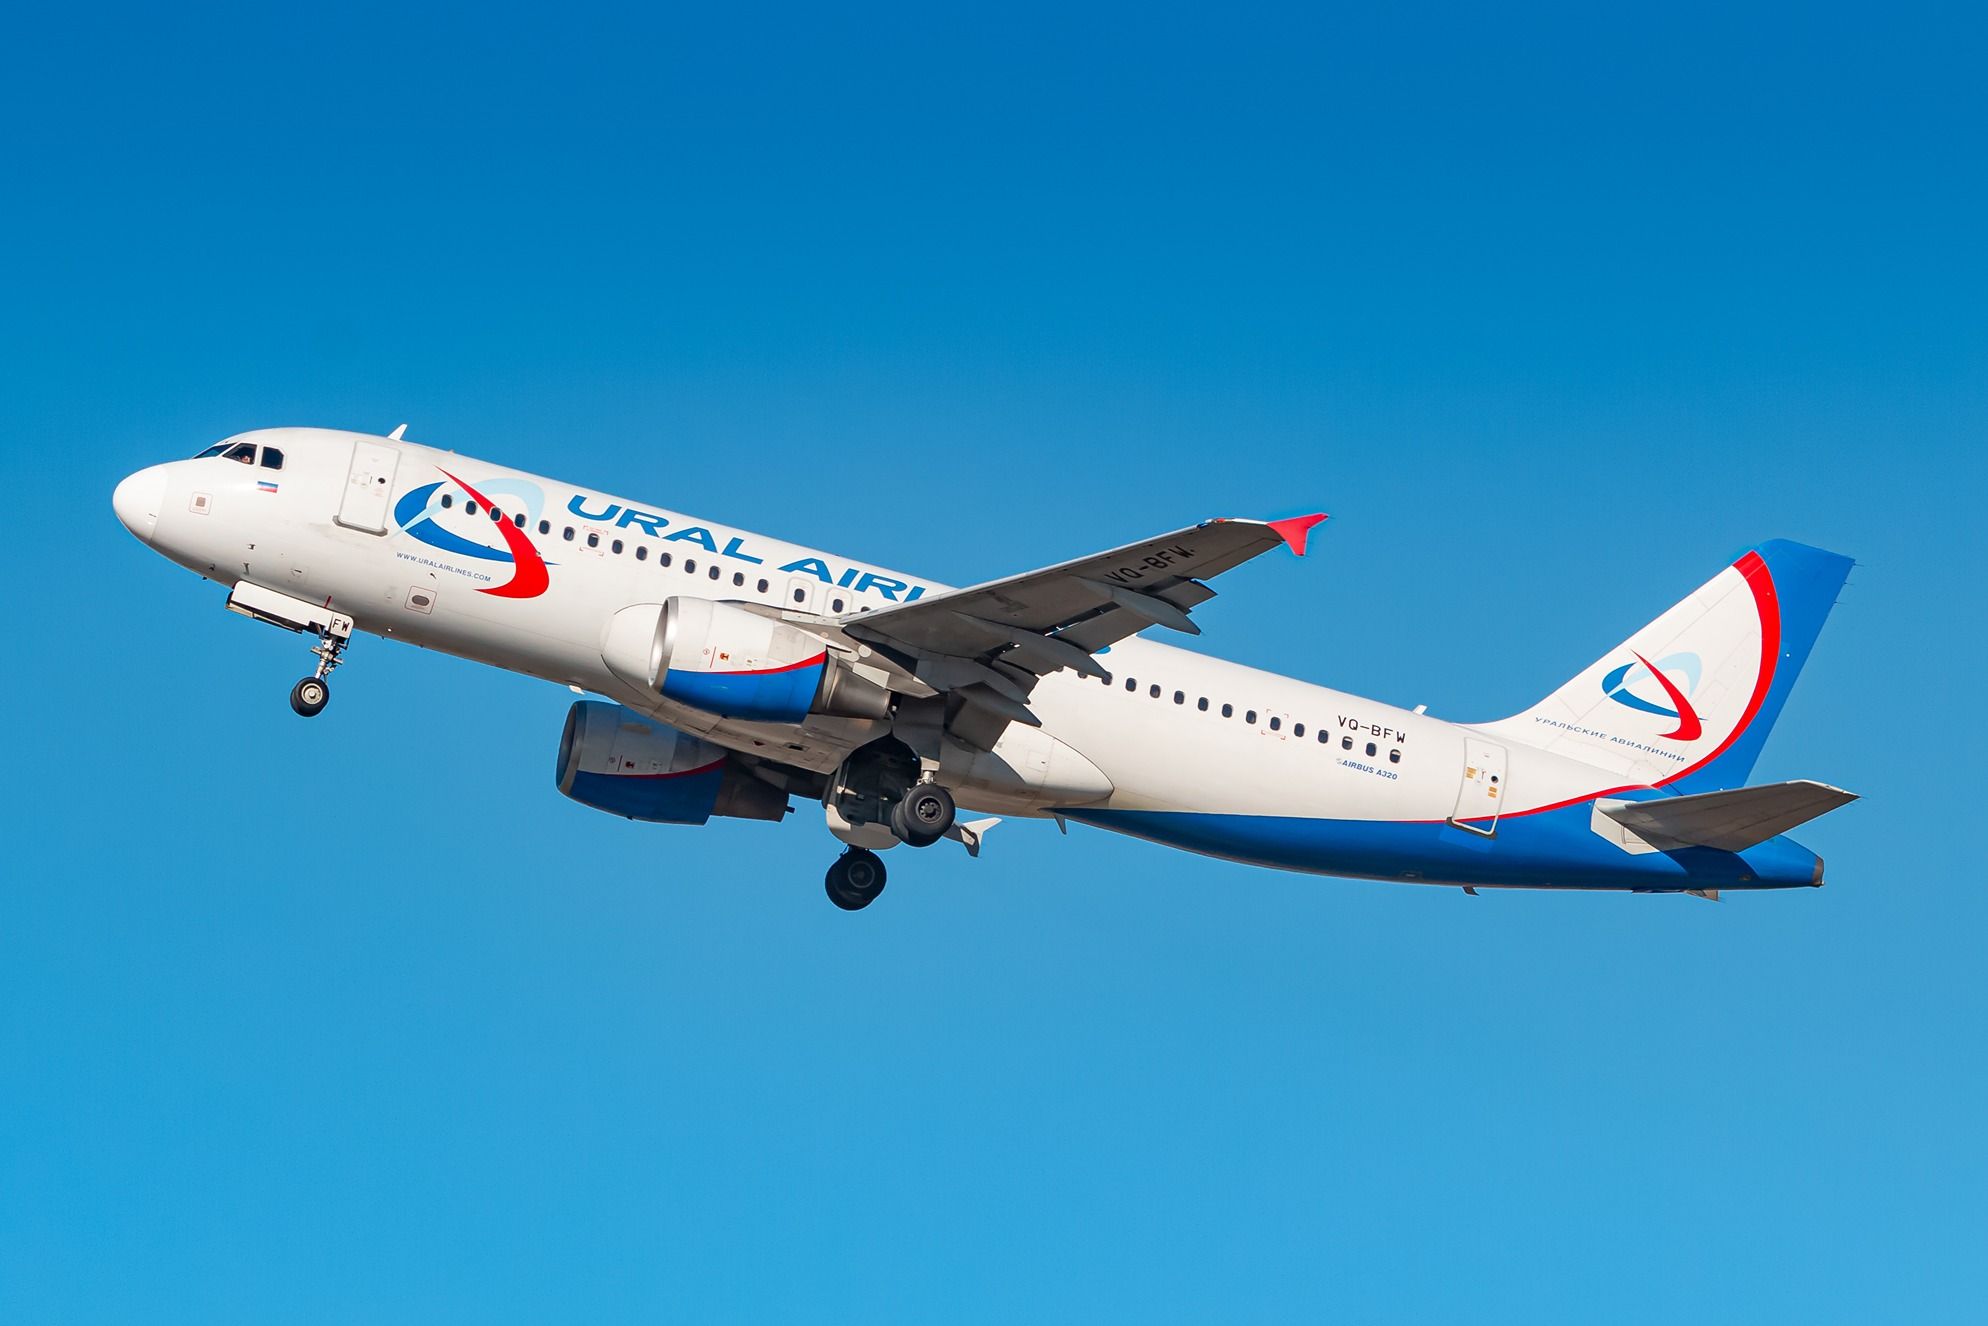 Ural Airlines Airbus A320 departing